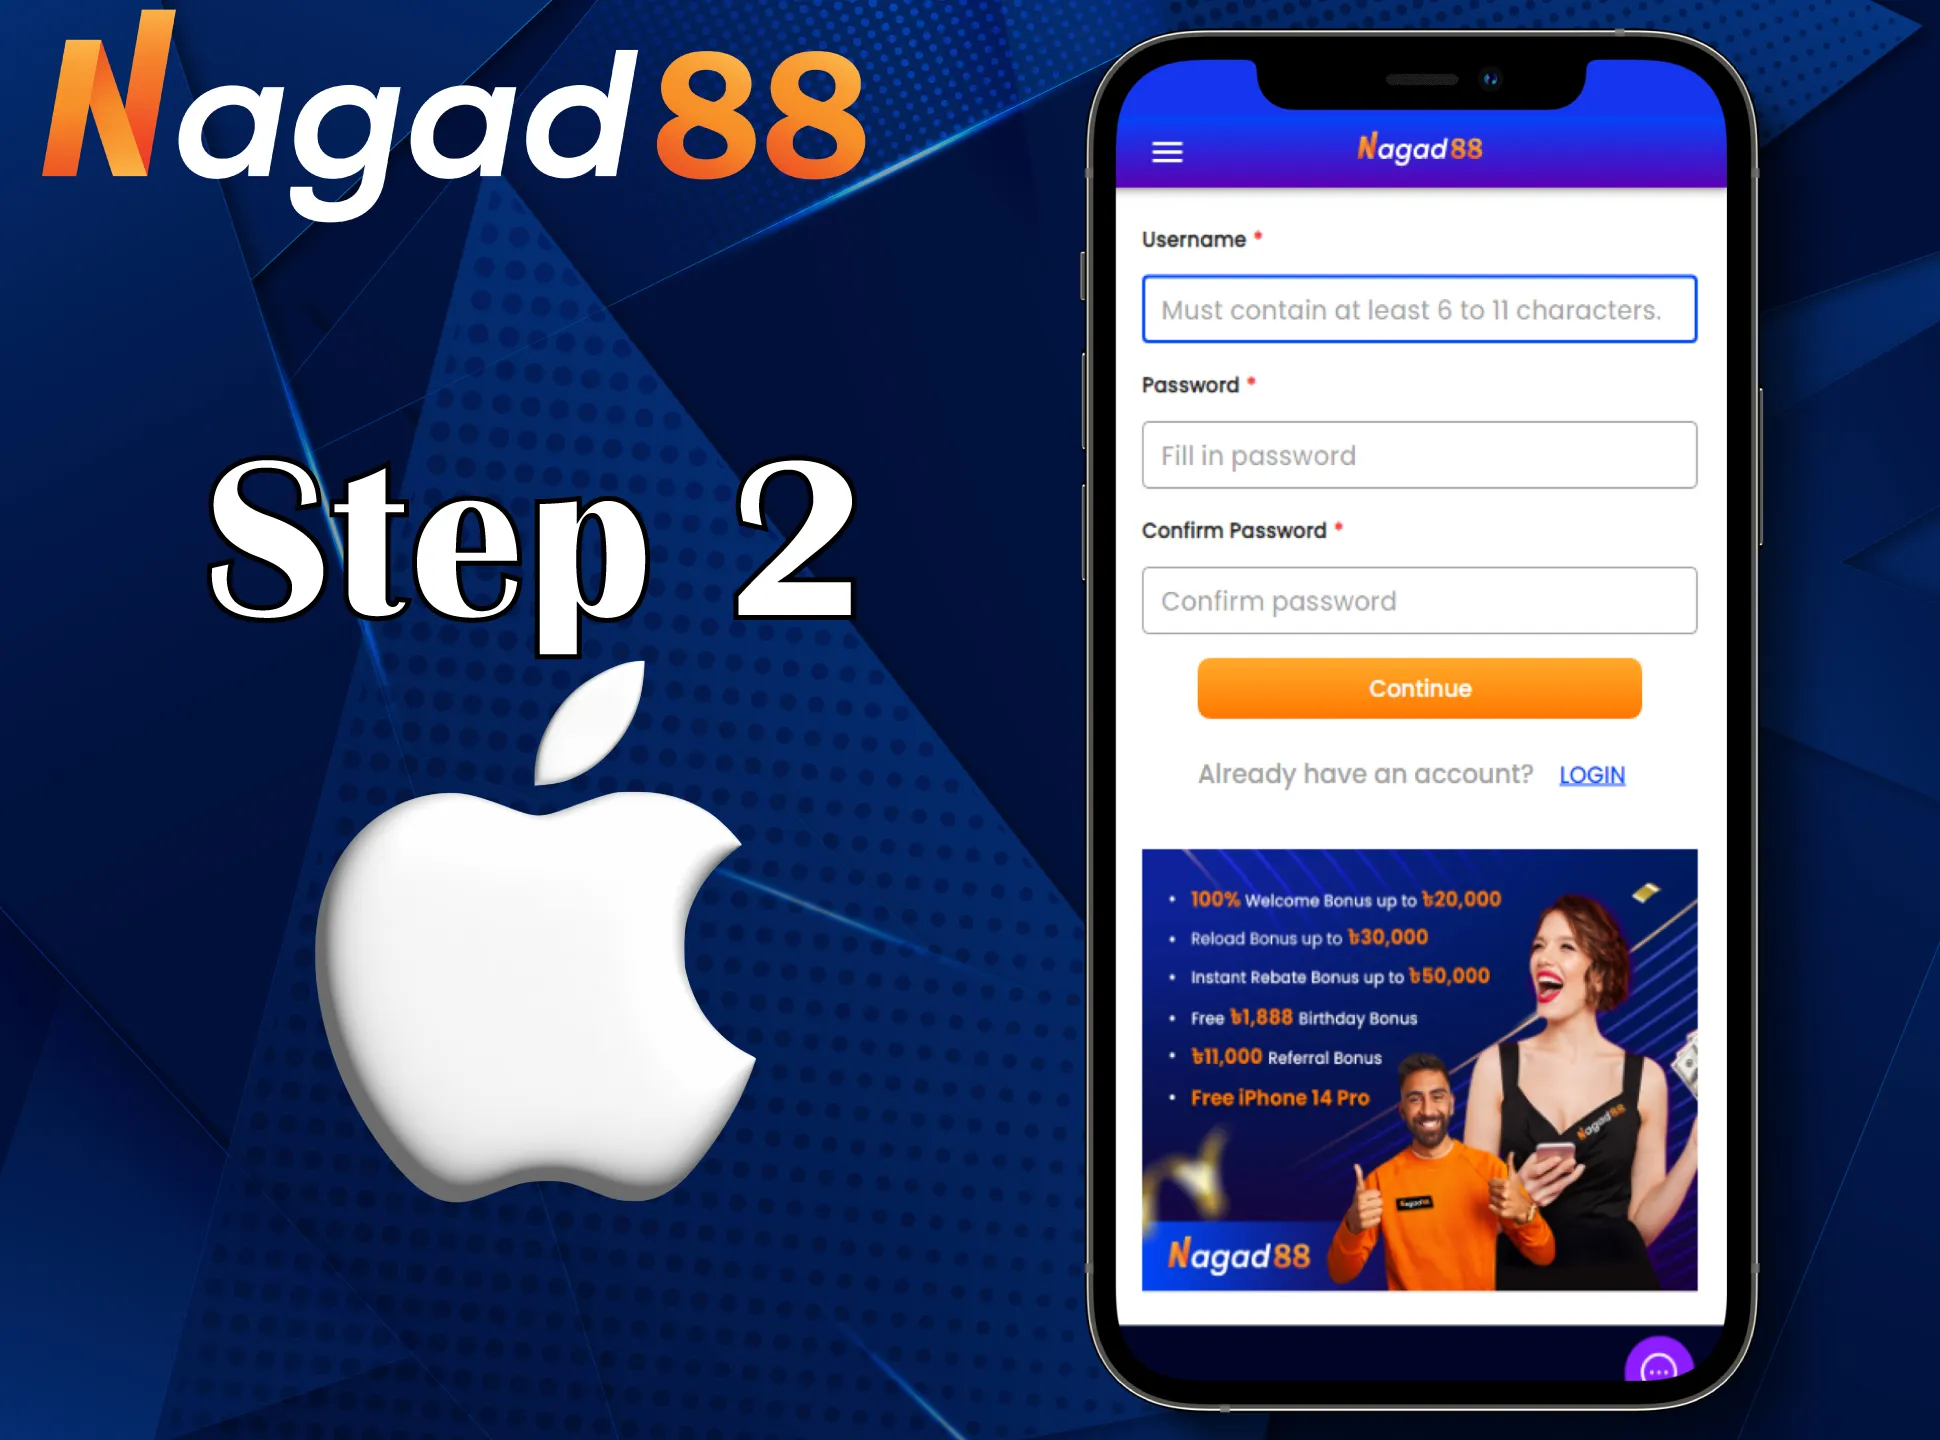 Sign up for the Nagad88 app.